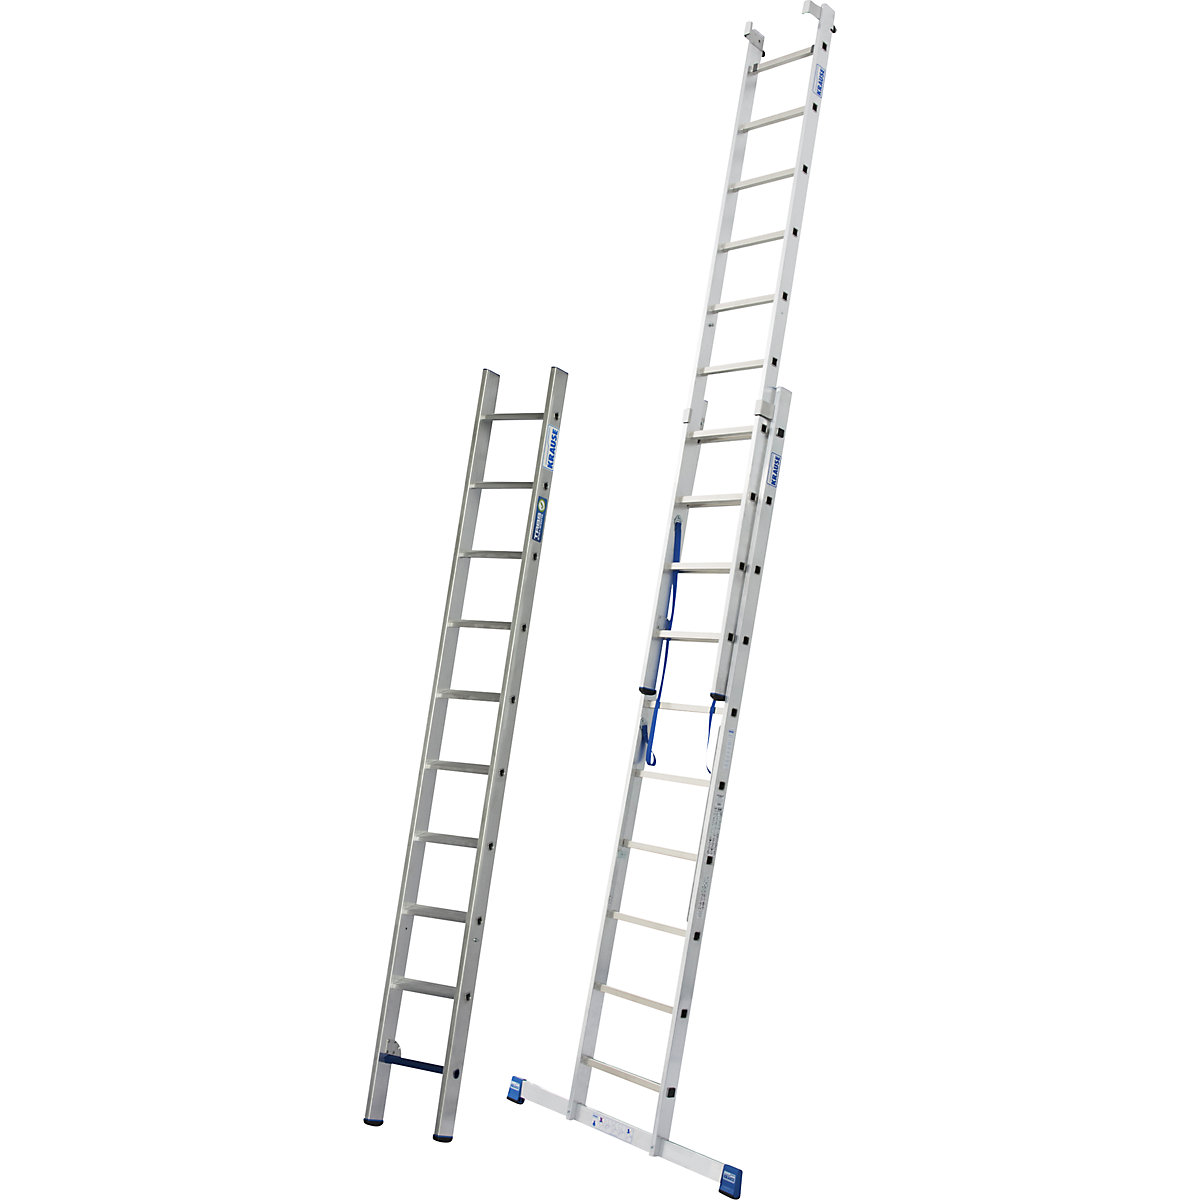 Includes One 7-Step Ladder, One 9-Step Ladder, and One 11-Step Ladder Birdie Basics Wood Ladders 3pcs Combo Pack 